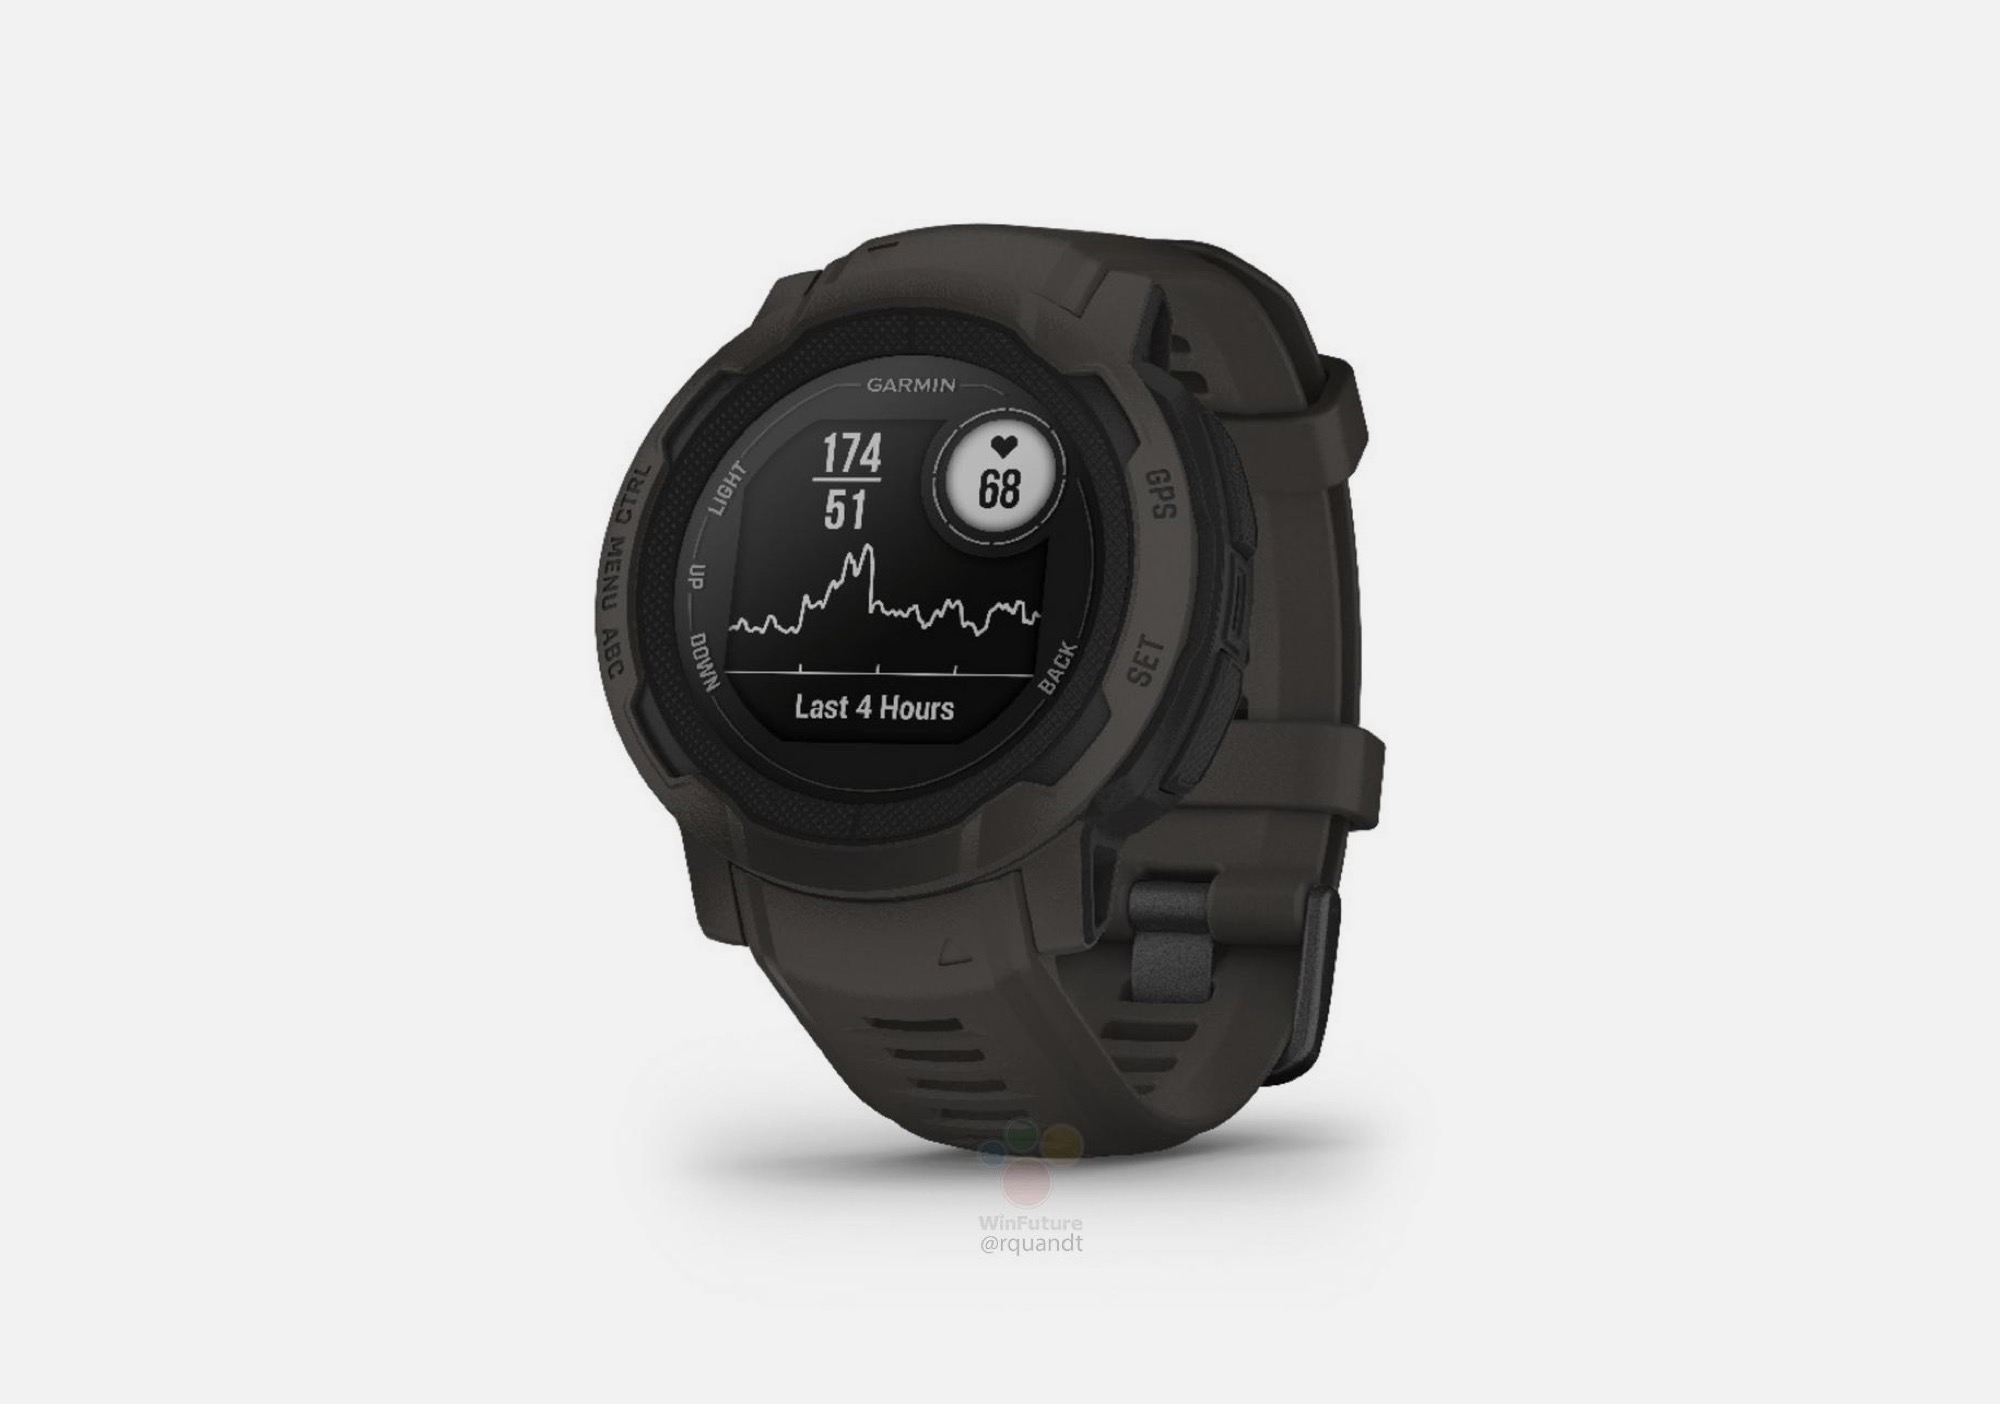 Garmin 2 Solar to launch next month with practically unlimited life - NotebookCheck.net News